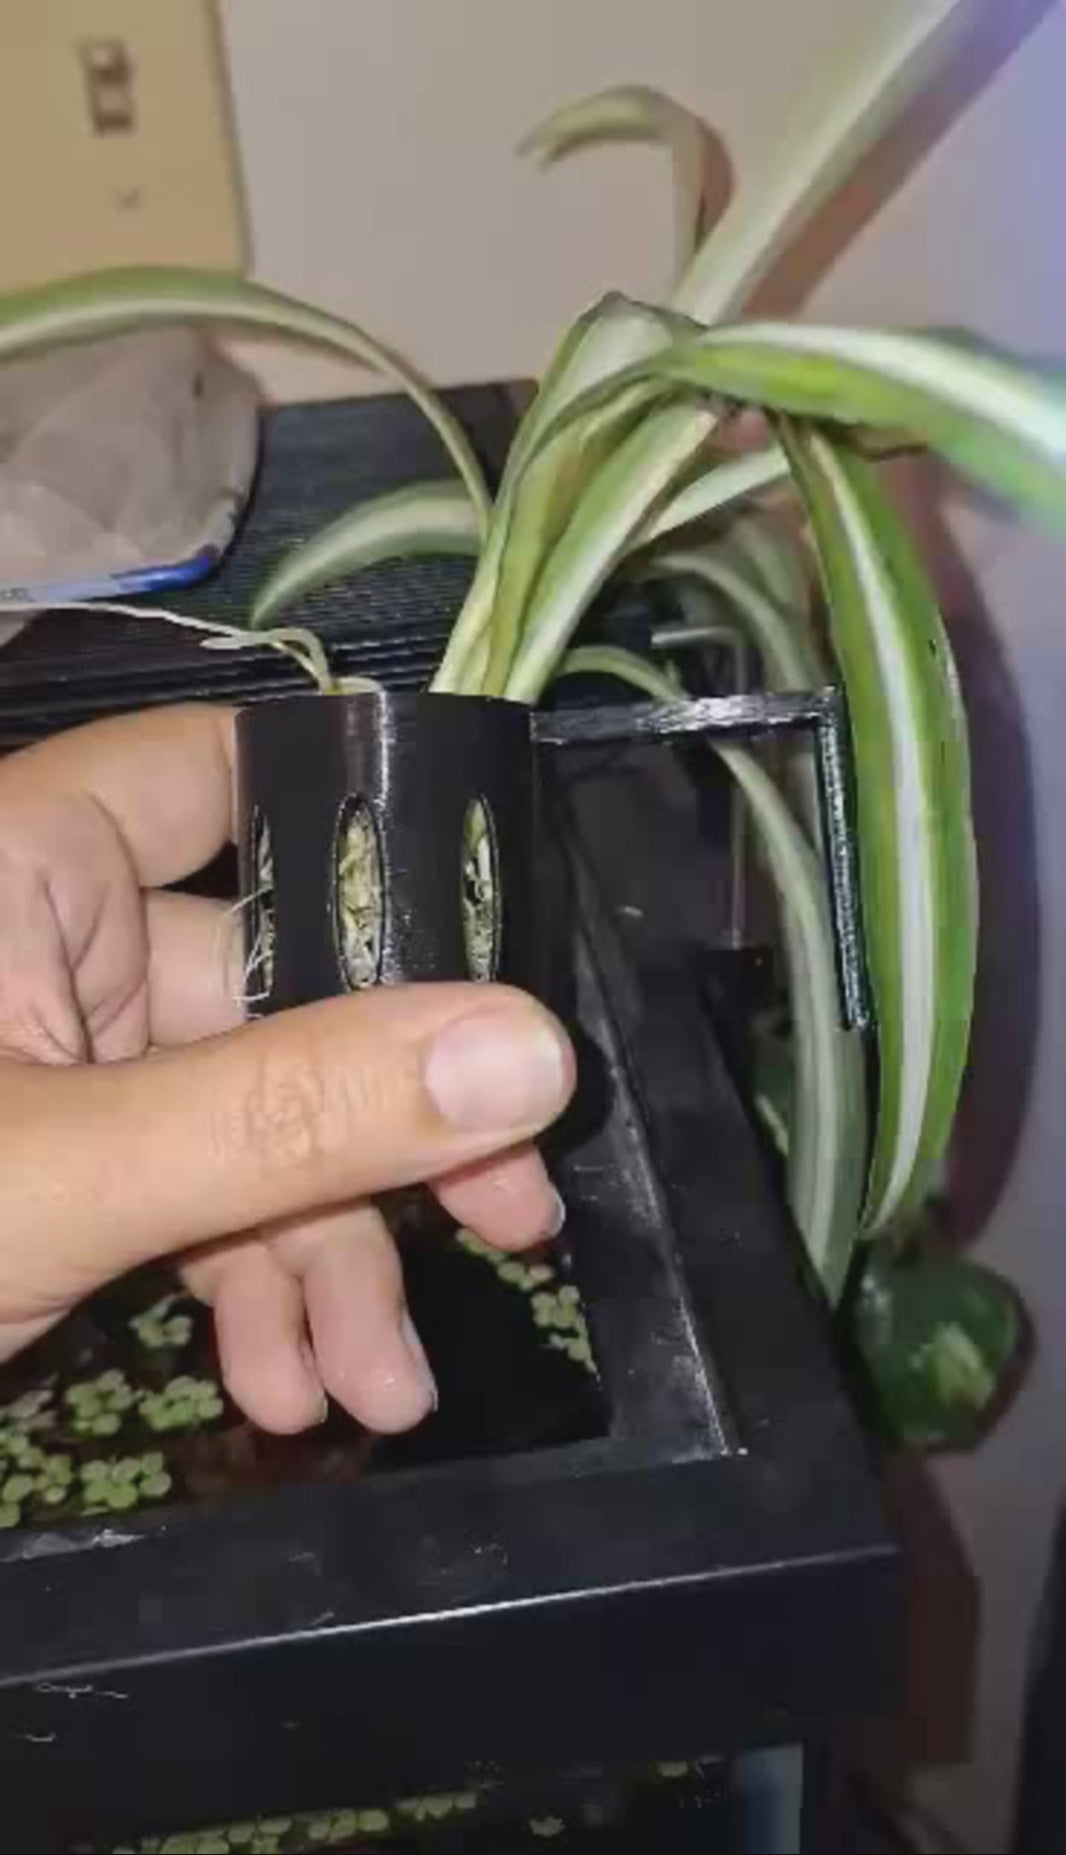 Demonstration of the Hang-On Plant Buddy in Overture black PETG, designed to securely hold a Spider Plant on the side of an Aqueon 55-gallon rimmed tank. The video highlights the stabilizer feature that keeps the Plant Buddy upright and showcases its stability with a hand smacking it lightly to prove it stays in place.